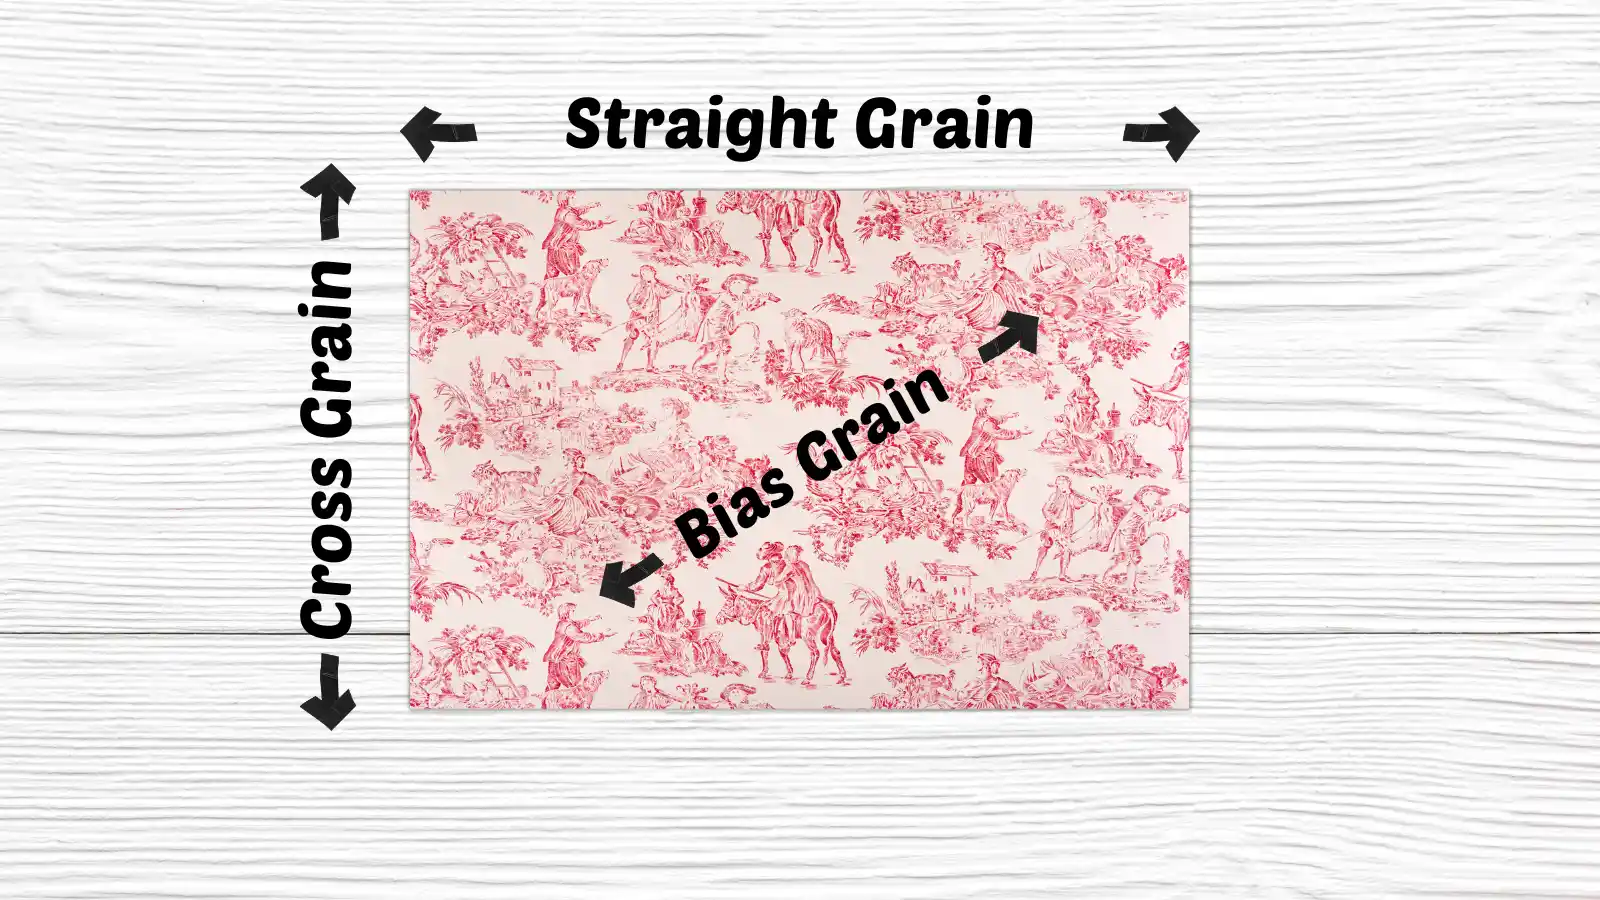 Cross Grain Vs Straight Grain: Which is Better for Your Project?